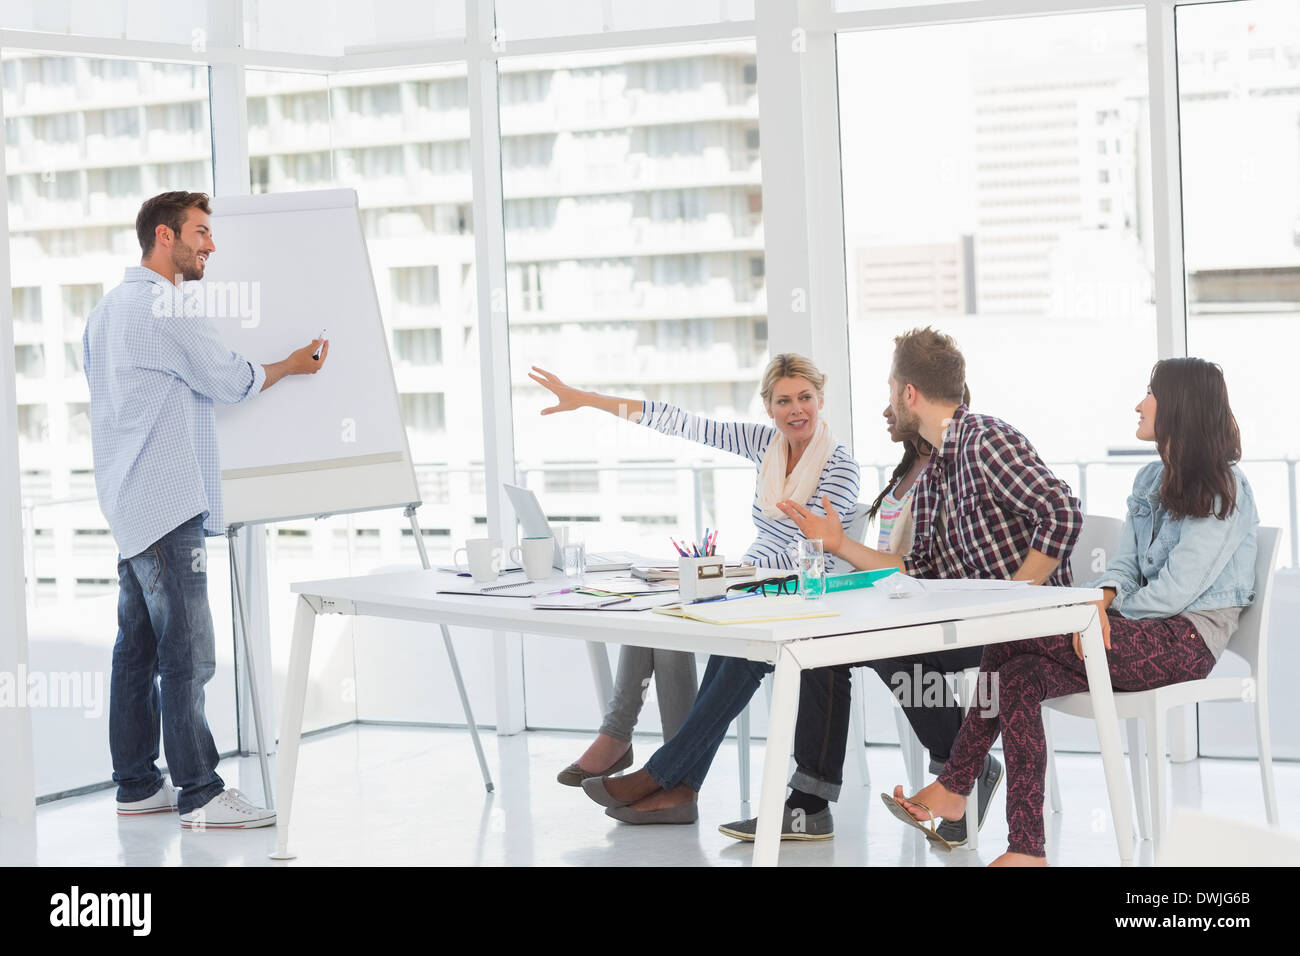 Man presenting an idea to his colleagues Stock Photo